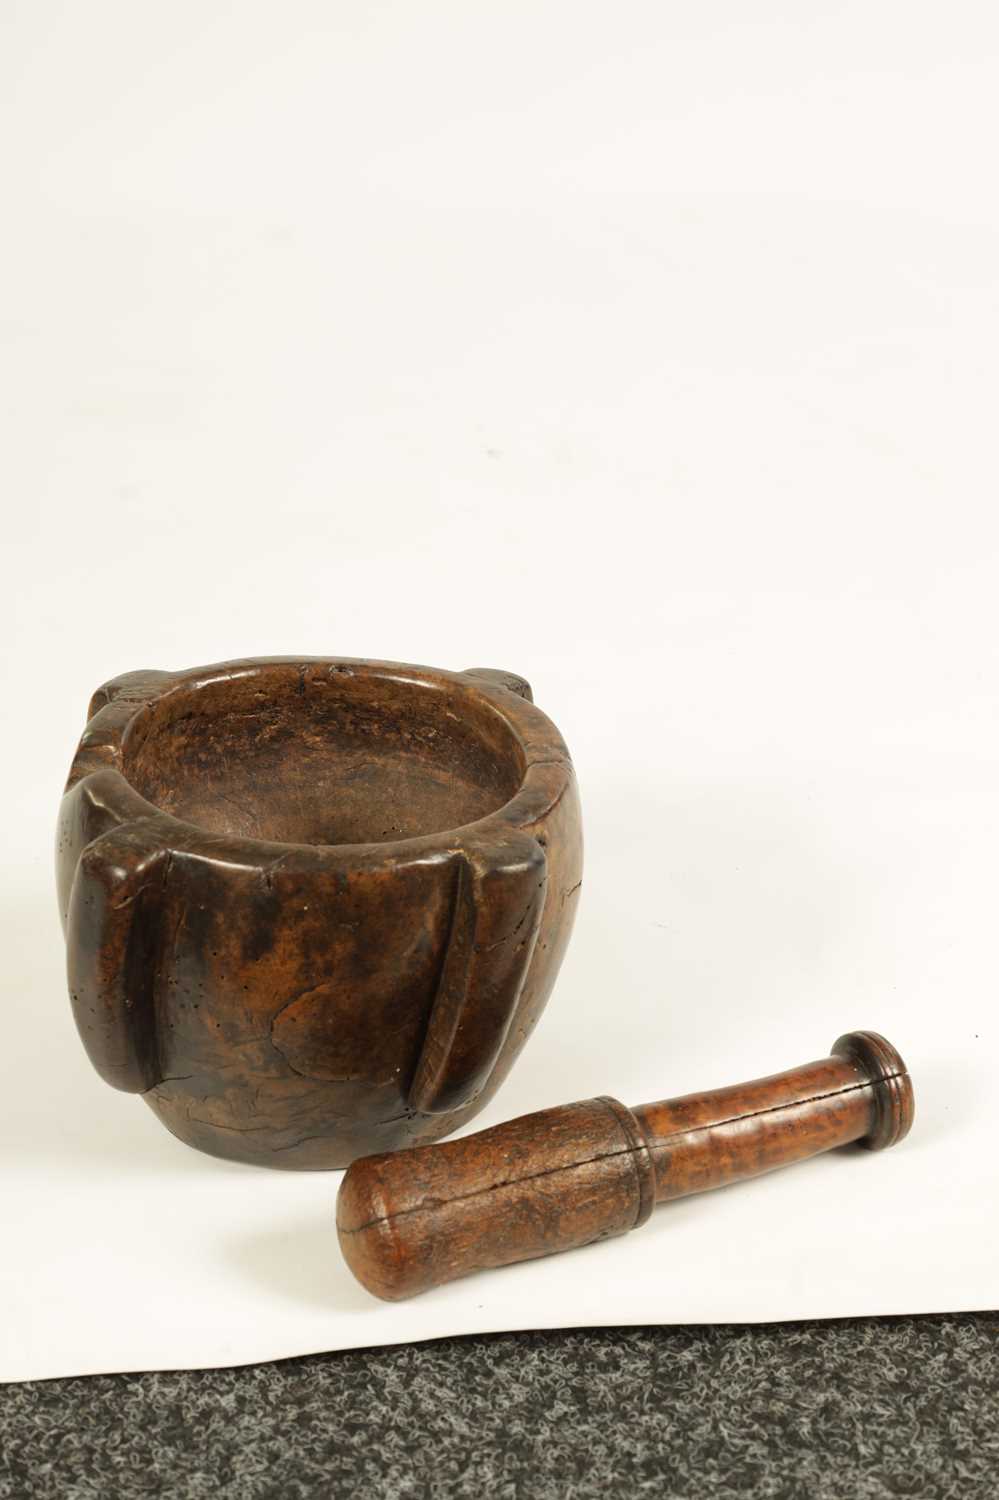 AN EARLY 16TH/17TH CENTURY BURR WALNUT PESTLE AND MORTAR - Image 3 of 8